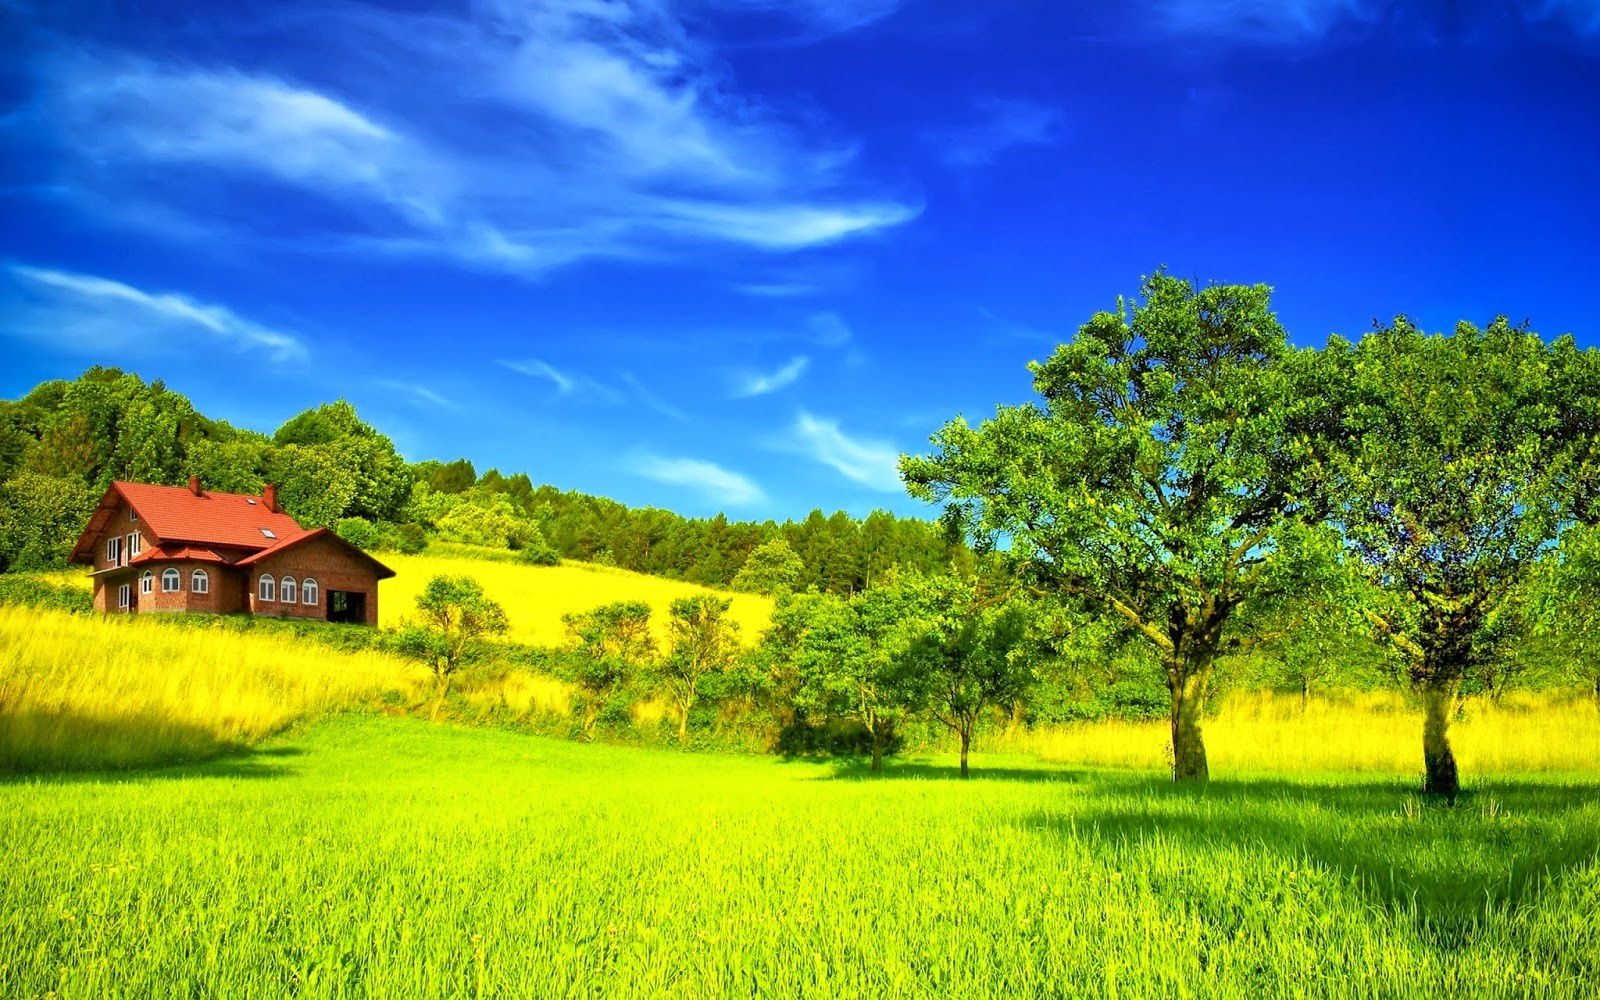 Most beautiful green nature wallpapers in the world Wallpaper